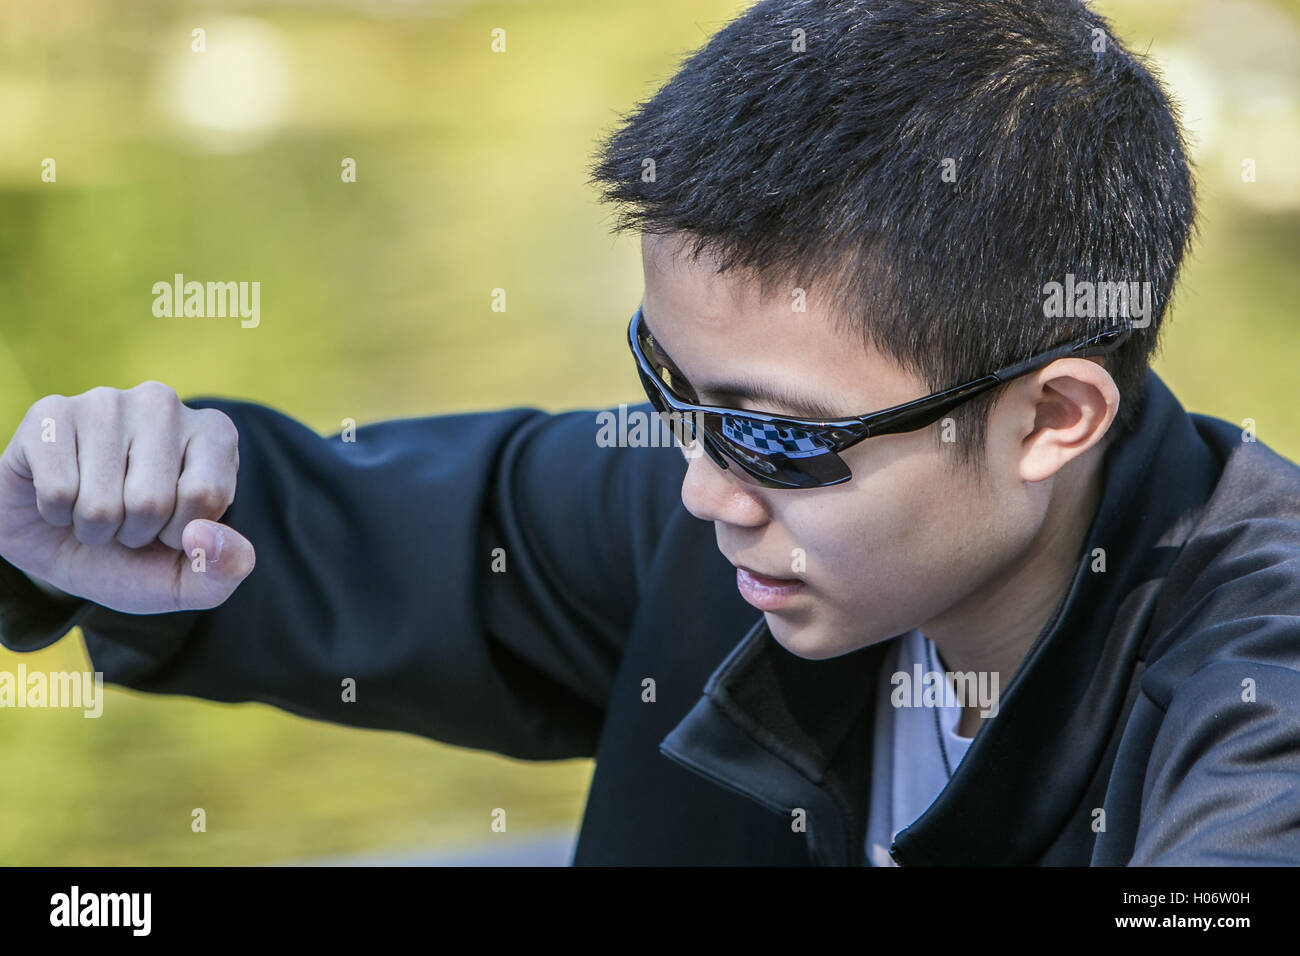 A boy is making a move during a game of chess. The chess board is reflected in his sunglasses. Stock Photo